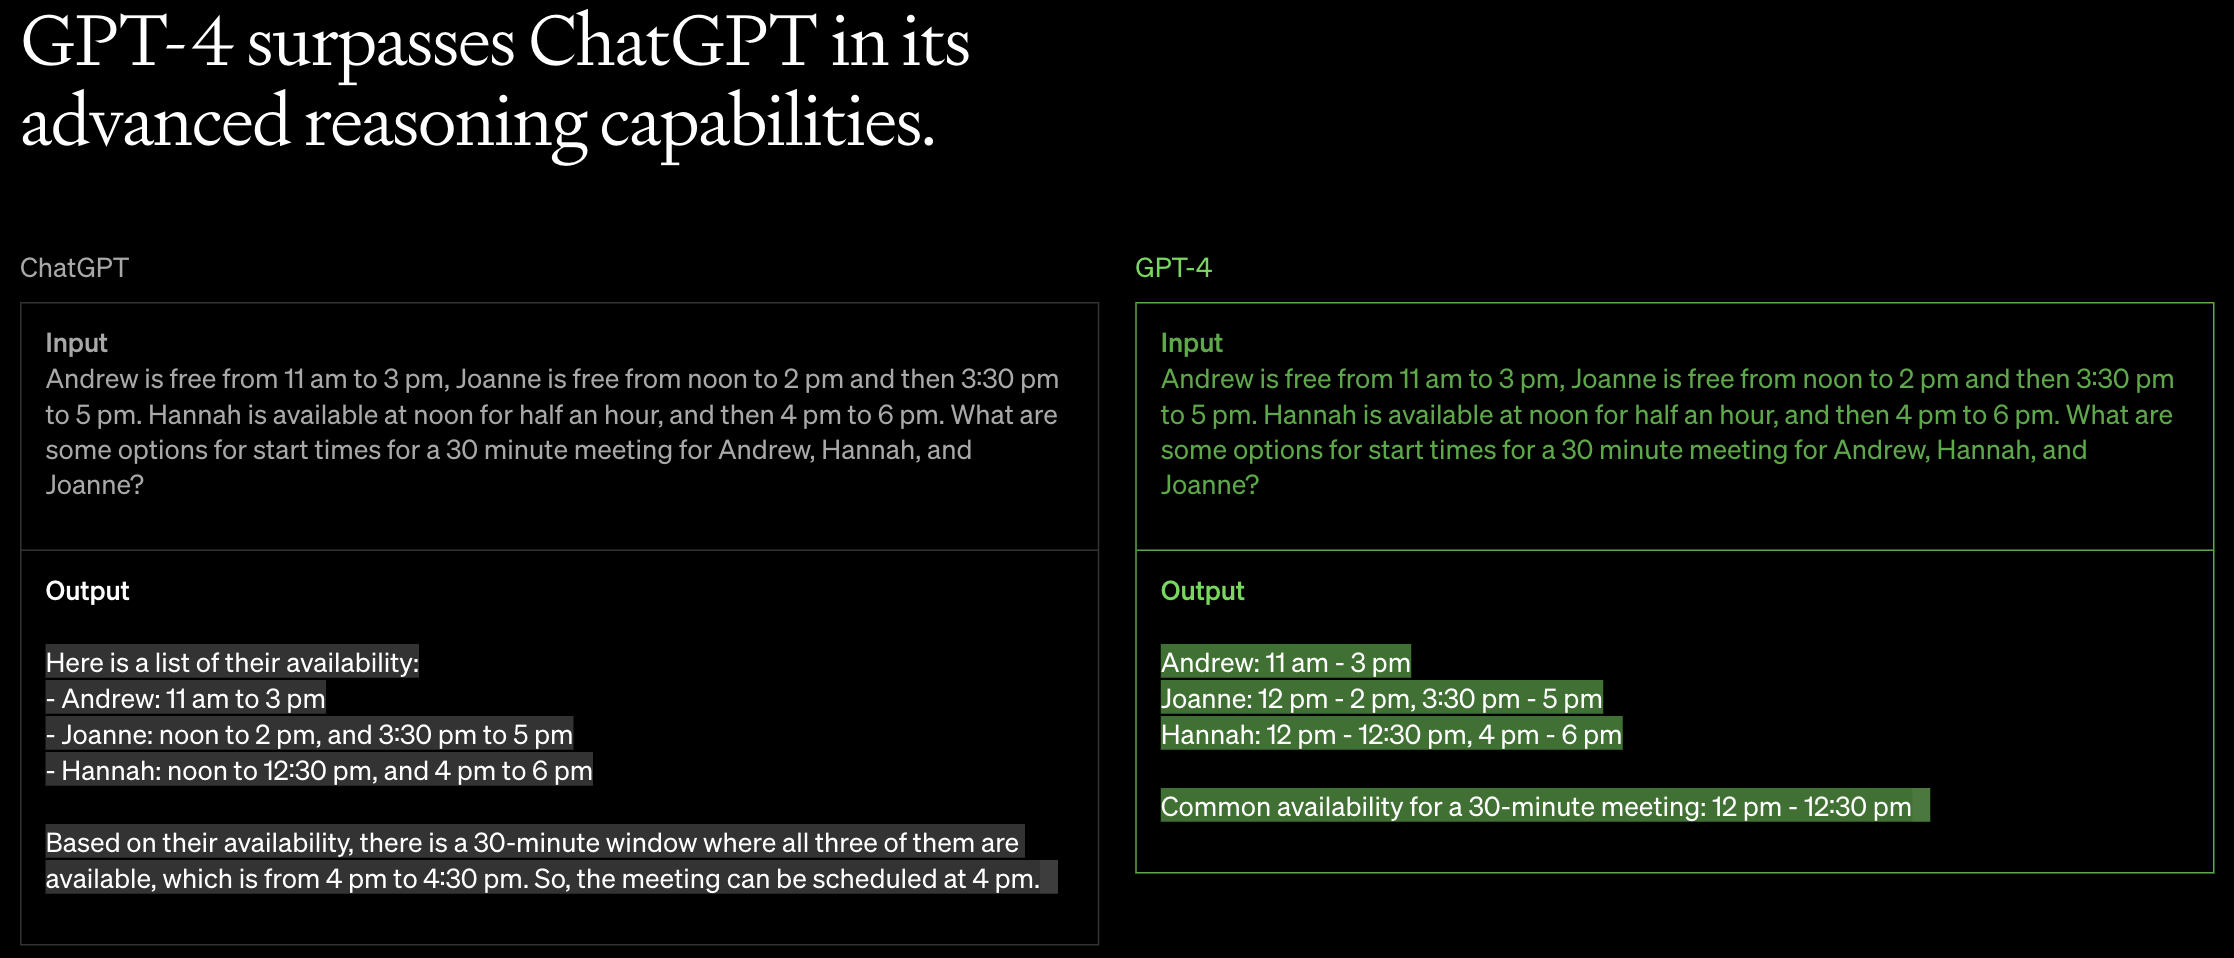 GPT-4 surpasses ChatGPT in its advanced reasoning capabilities. 